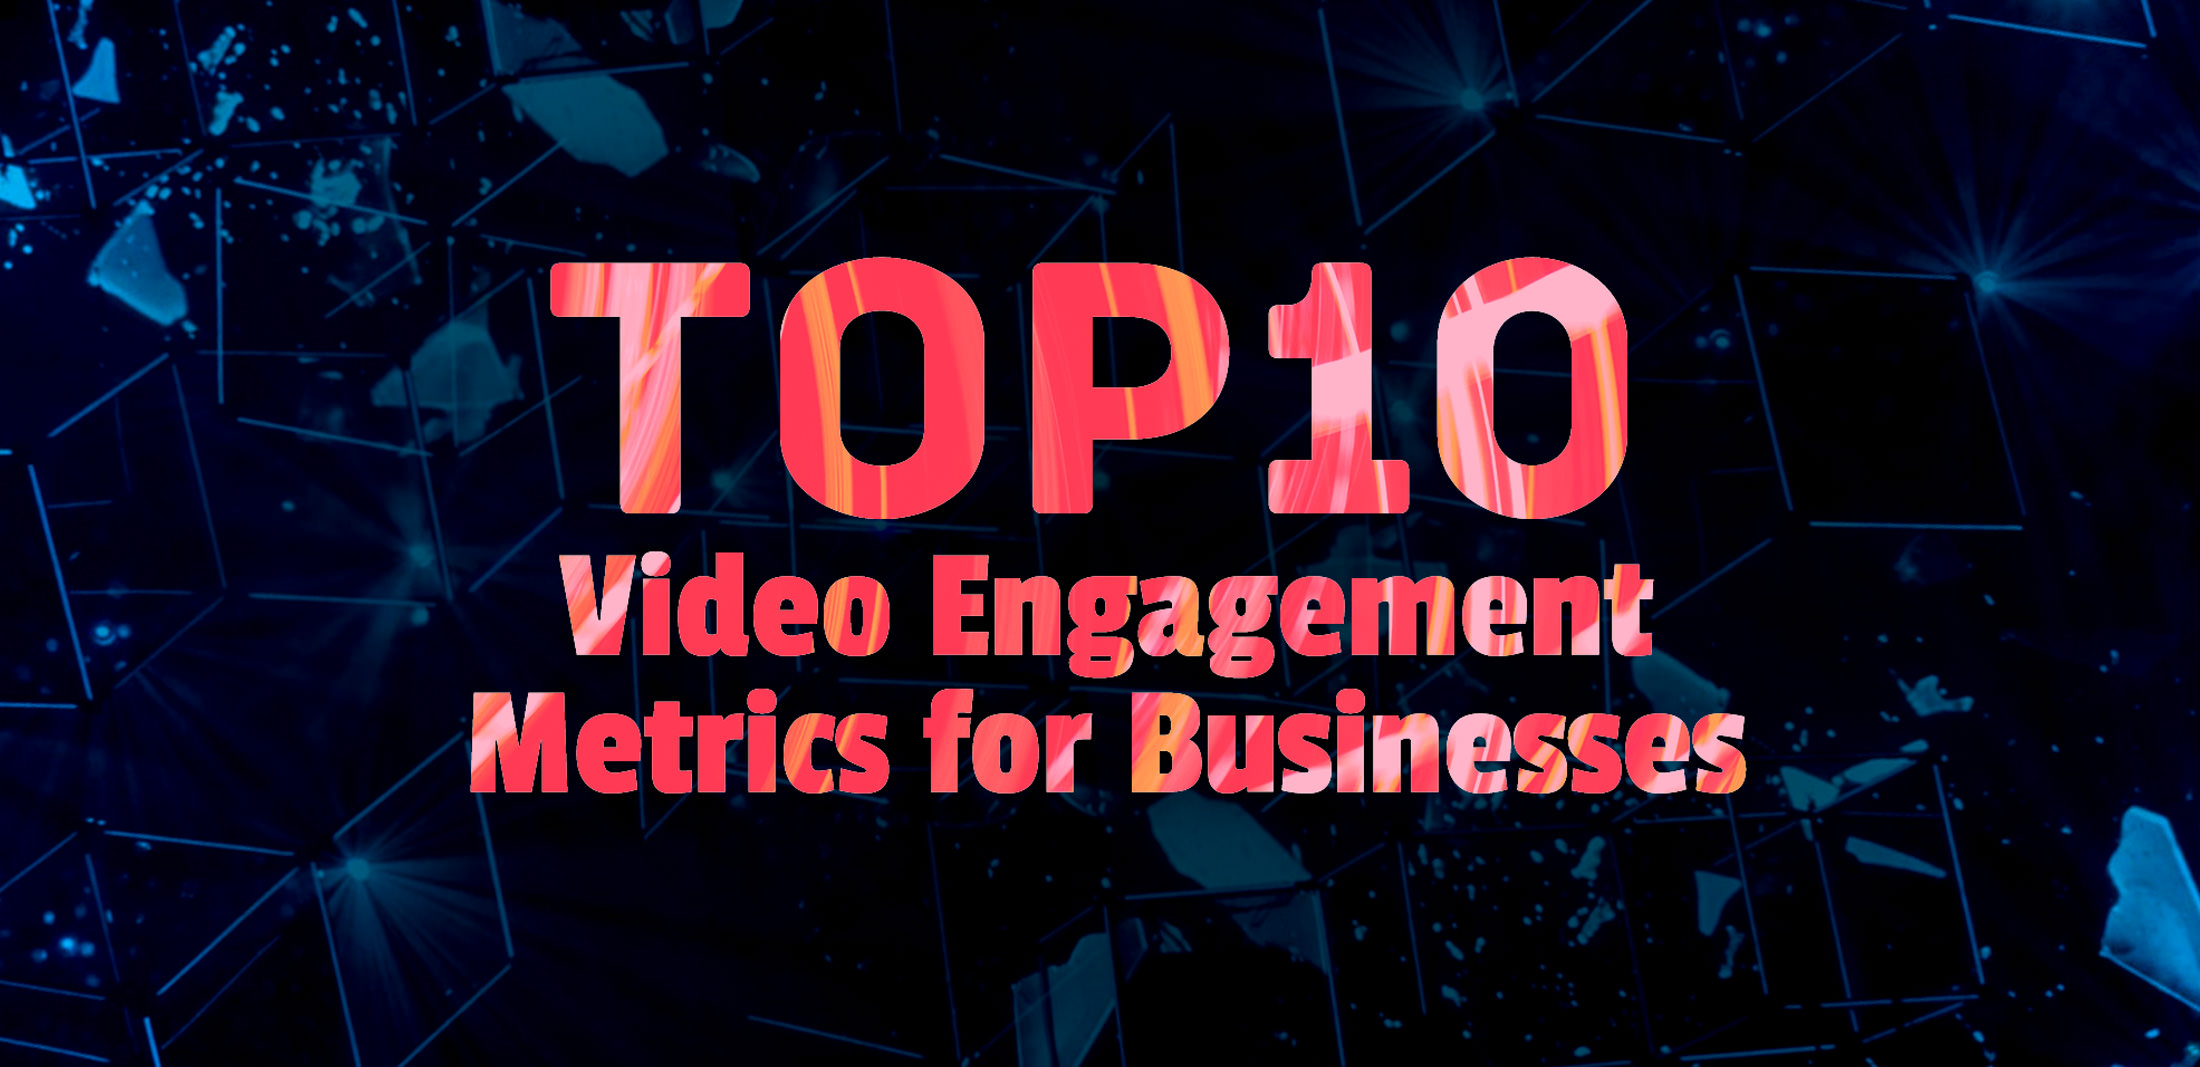 Top 10 Video Engagement Metrics for Businesses